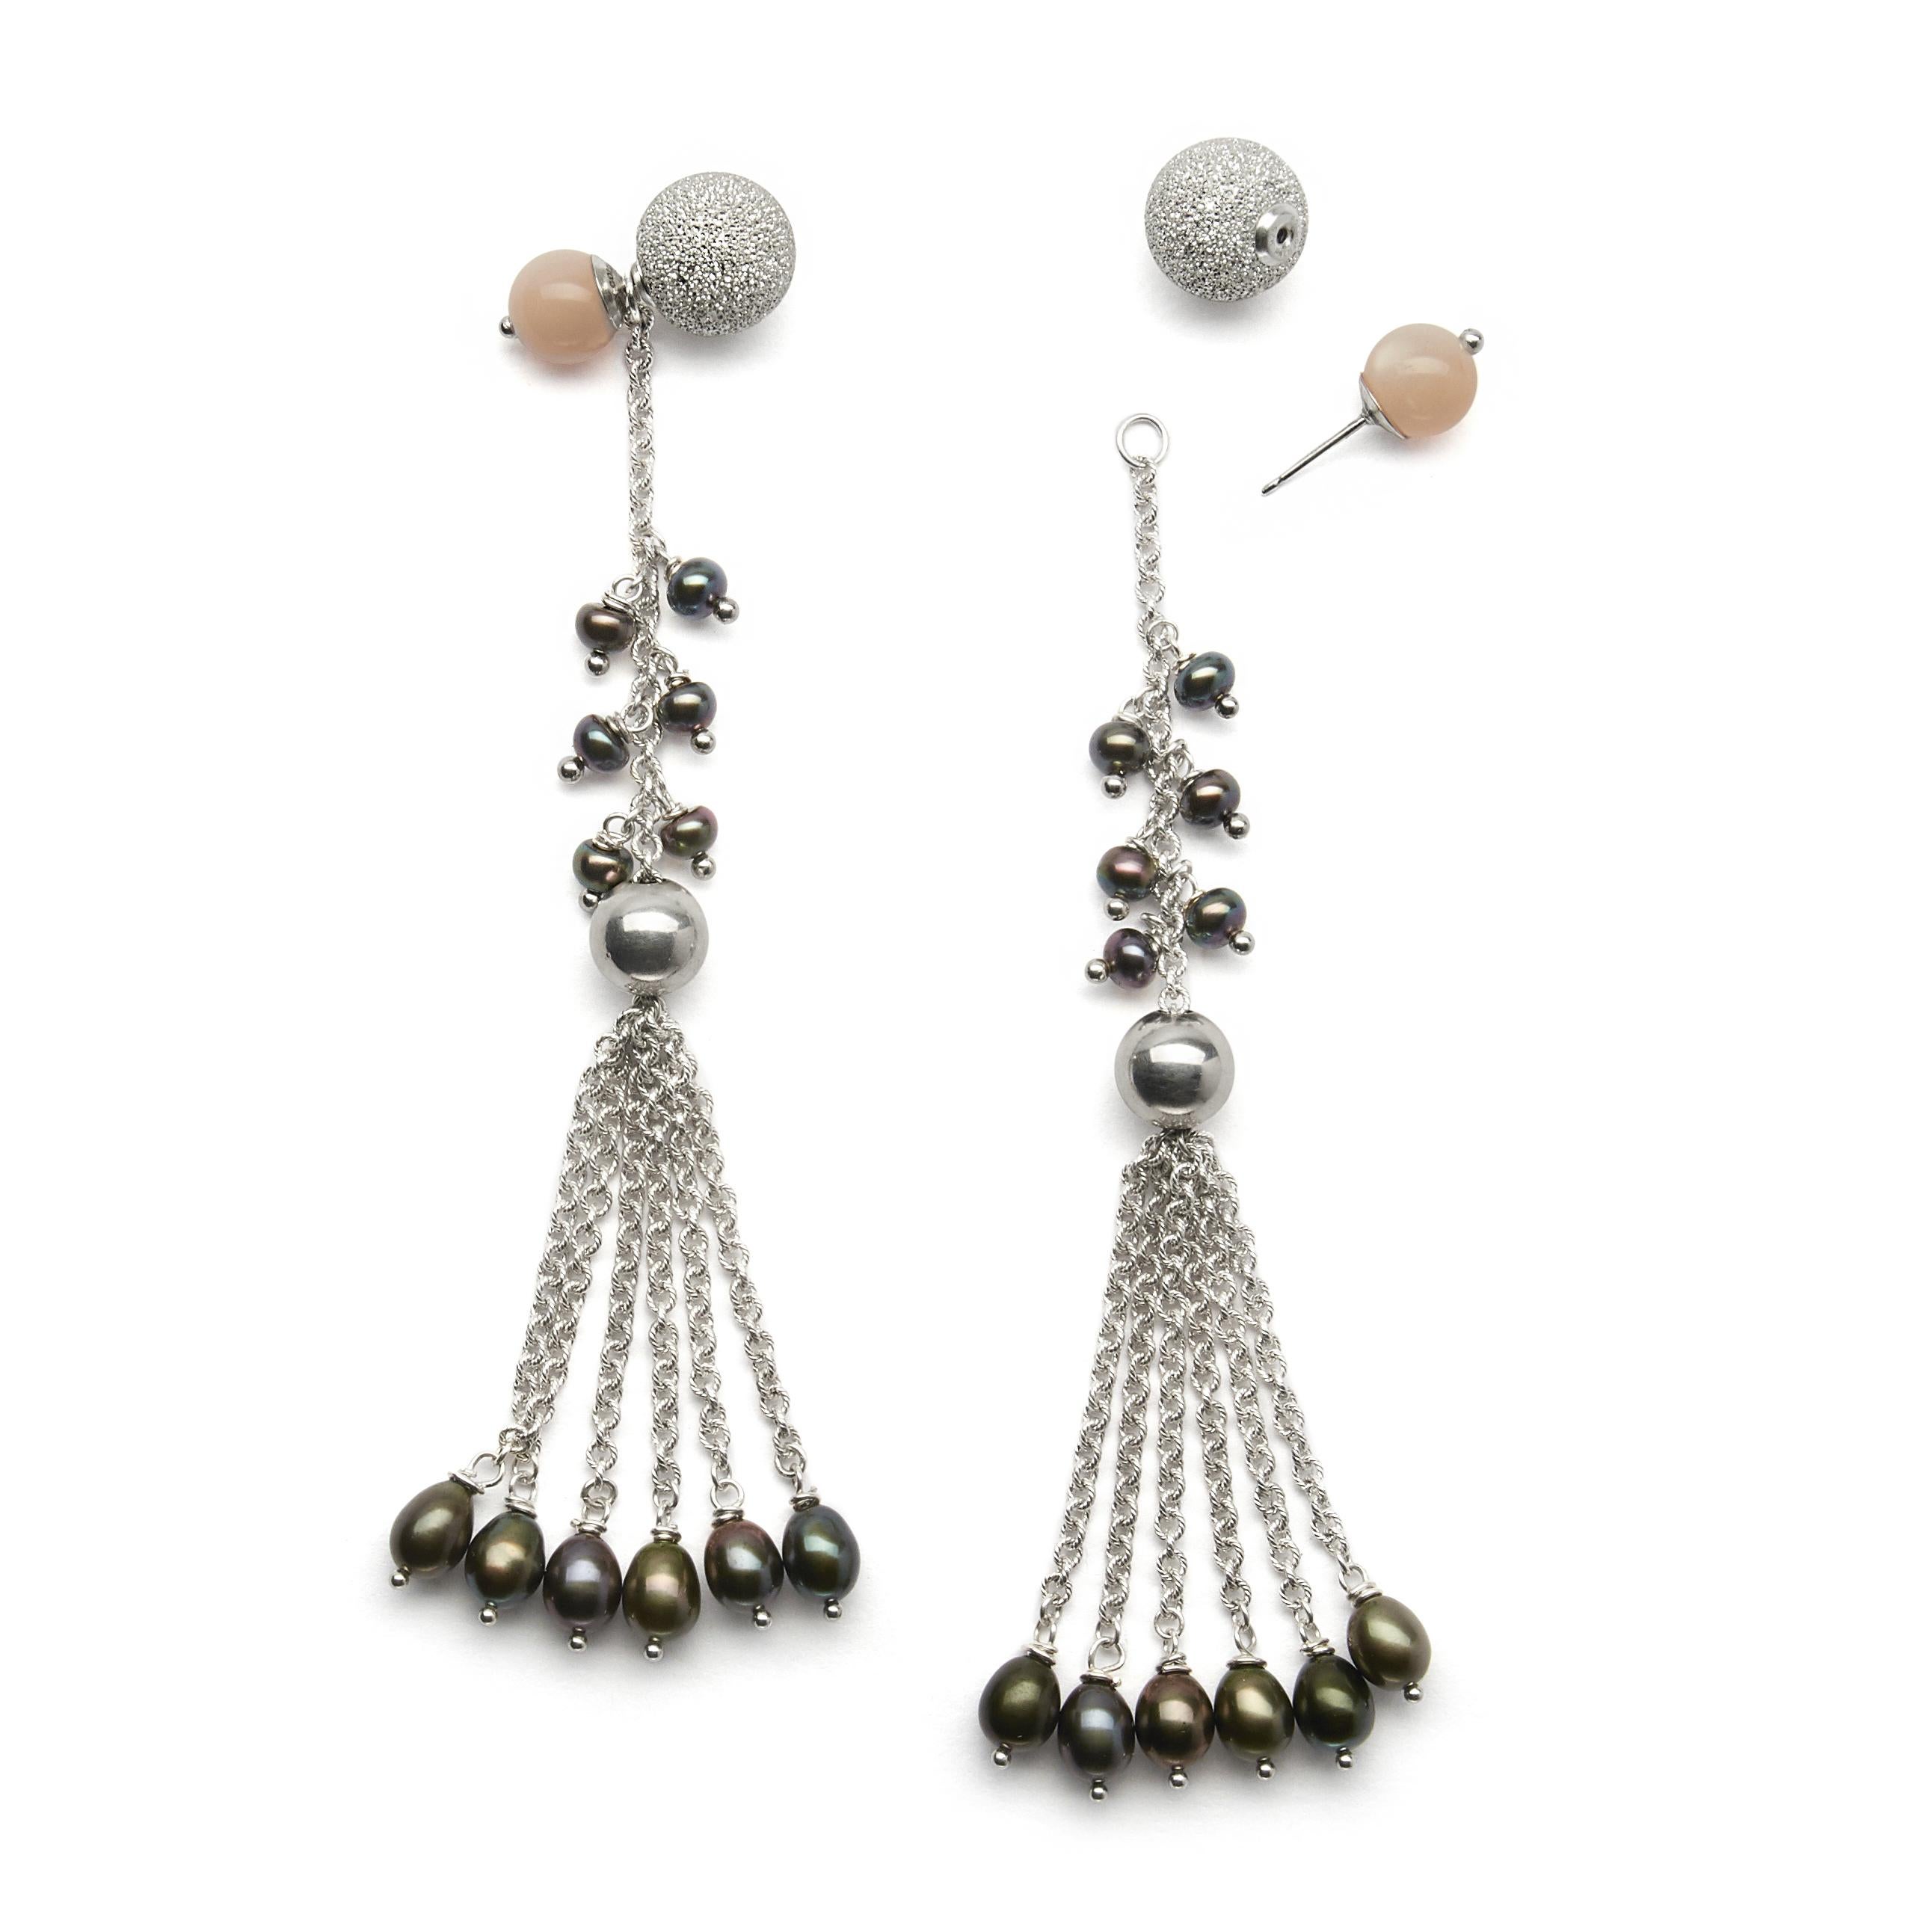 The classic and feminine earrings can warn as a captured through the perfect combination of peach moonstone & black cultured pearls, connected by a sterling silver chain tassel in these stunning two-in-one earrings. The bottom part of the earring is